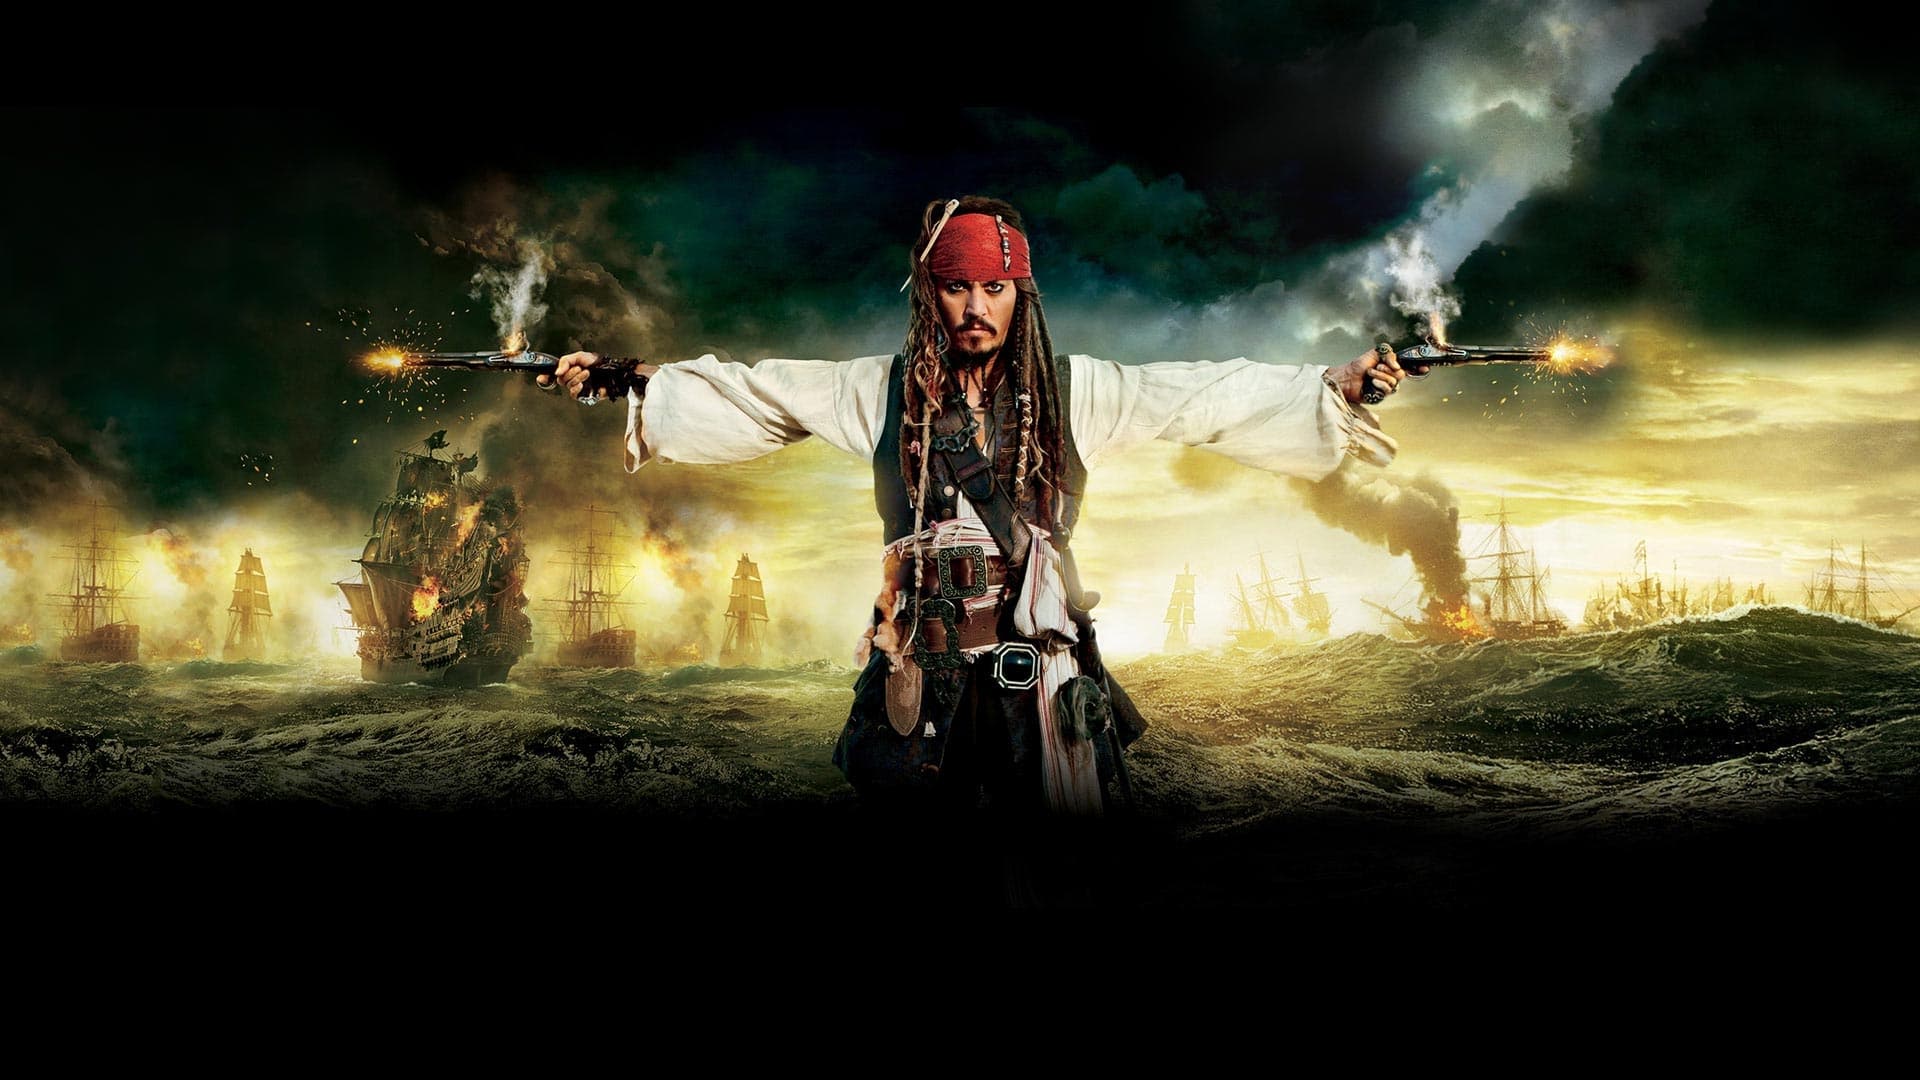 Pirates of the Caribbean: I Ukendt Farvand (2011)